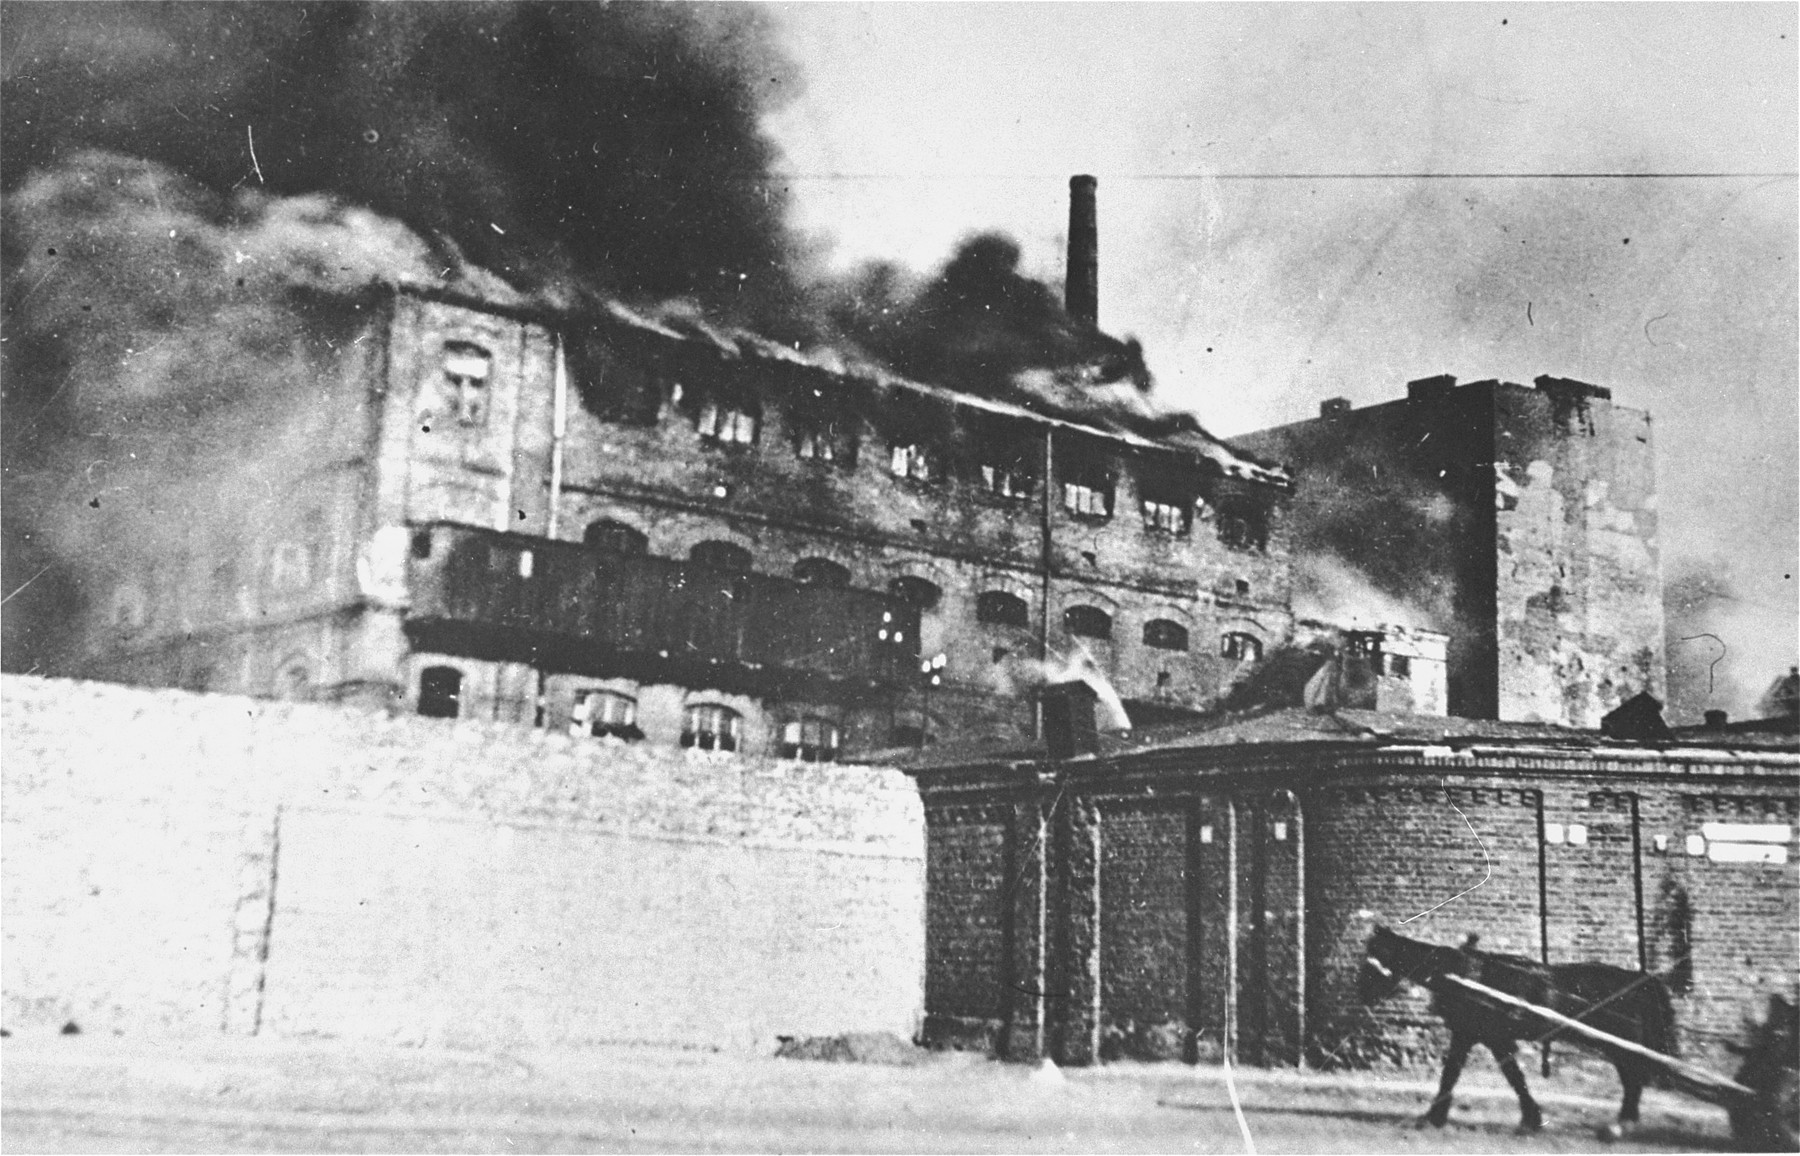 A factory razed by the SS burns during the suppression of the Warsaw ghetto uprising.